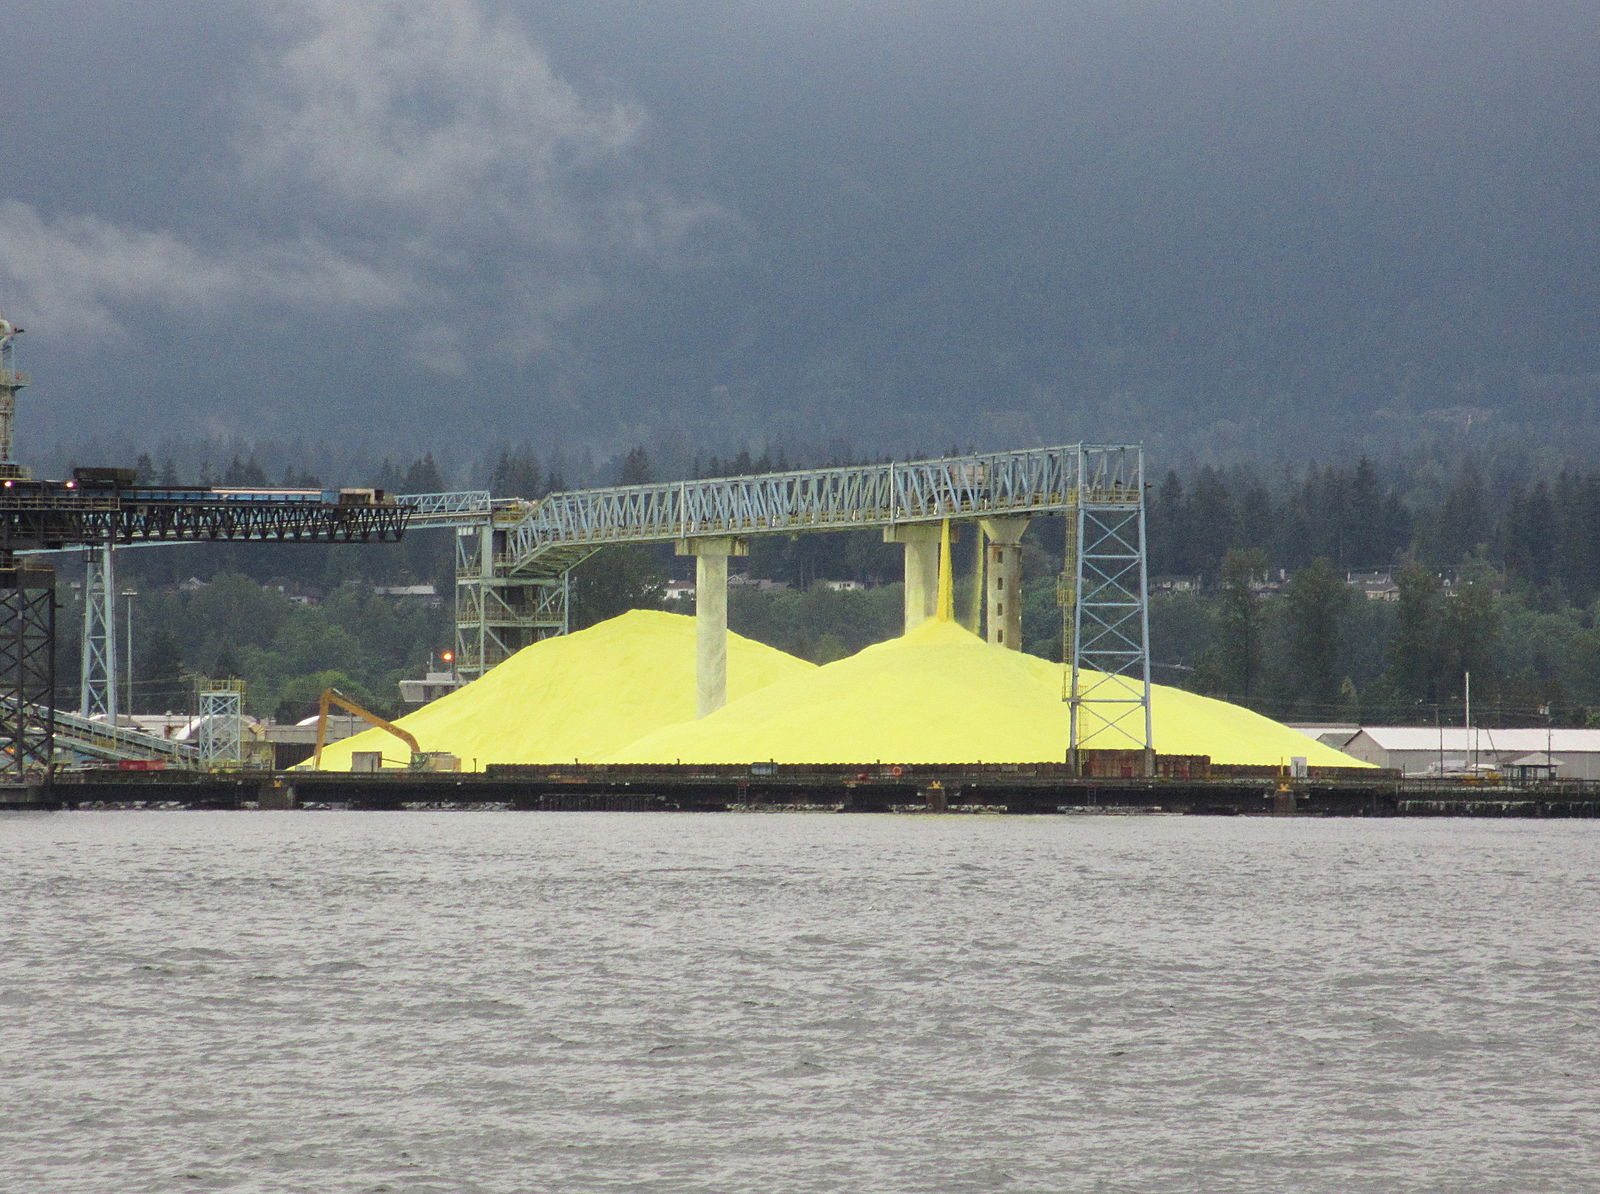 Fig. 5 (Click to enlarge). One of the major reasons for iron sulfide’s very low cost is the low cost of sulfur, which is essentially a waste product. This image shows a sulfur stockpile in Vancouver Harbor.  (Wikimedia Commons)